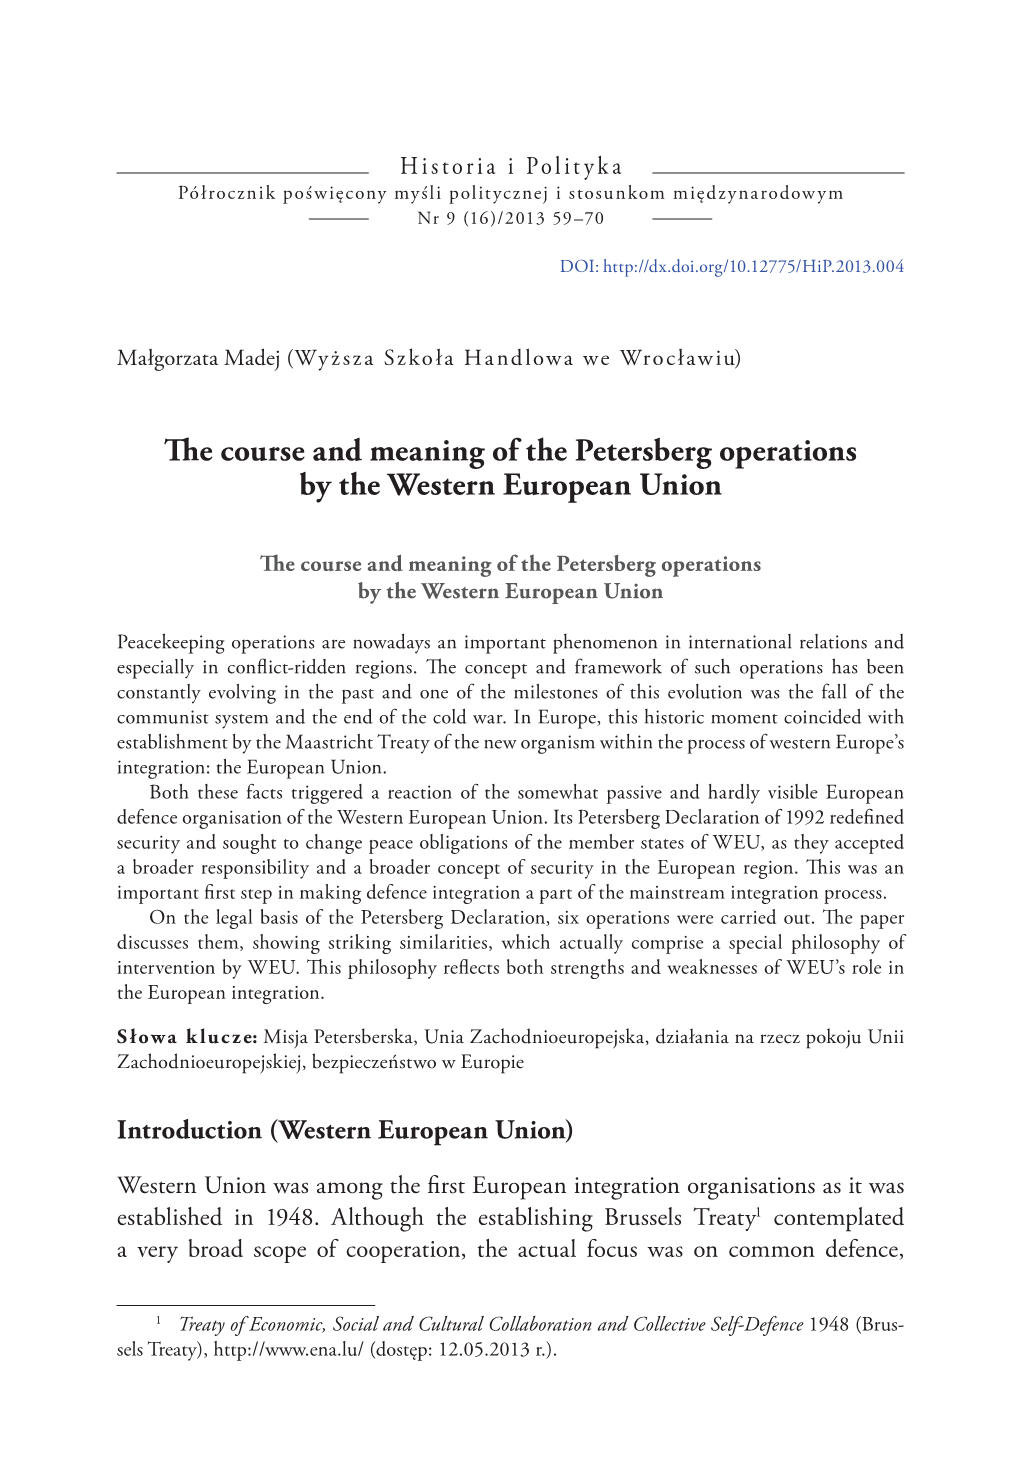 The Course and Meaning of the Petersberg Operations by the Western European Union